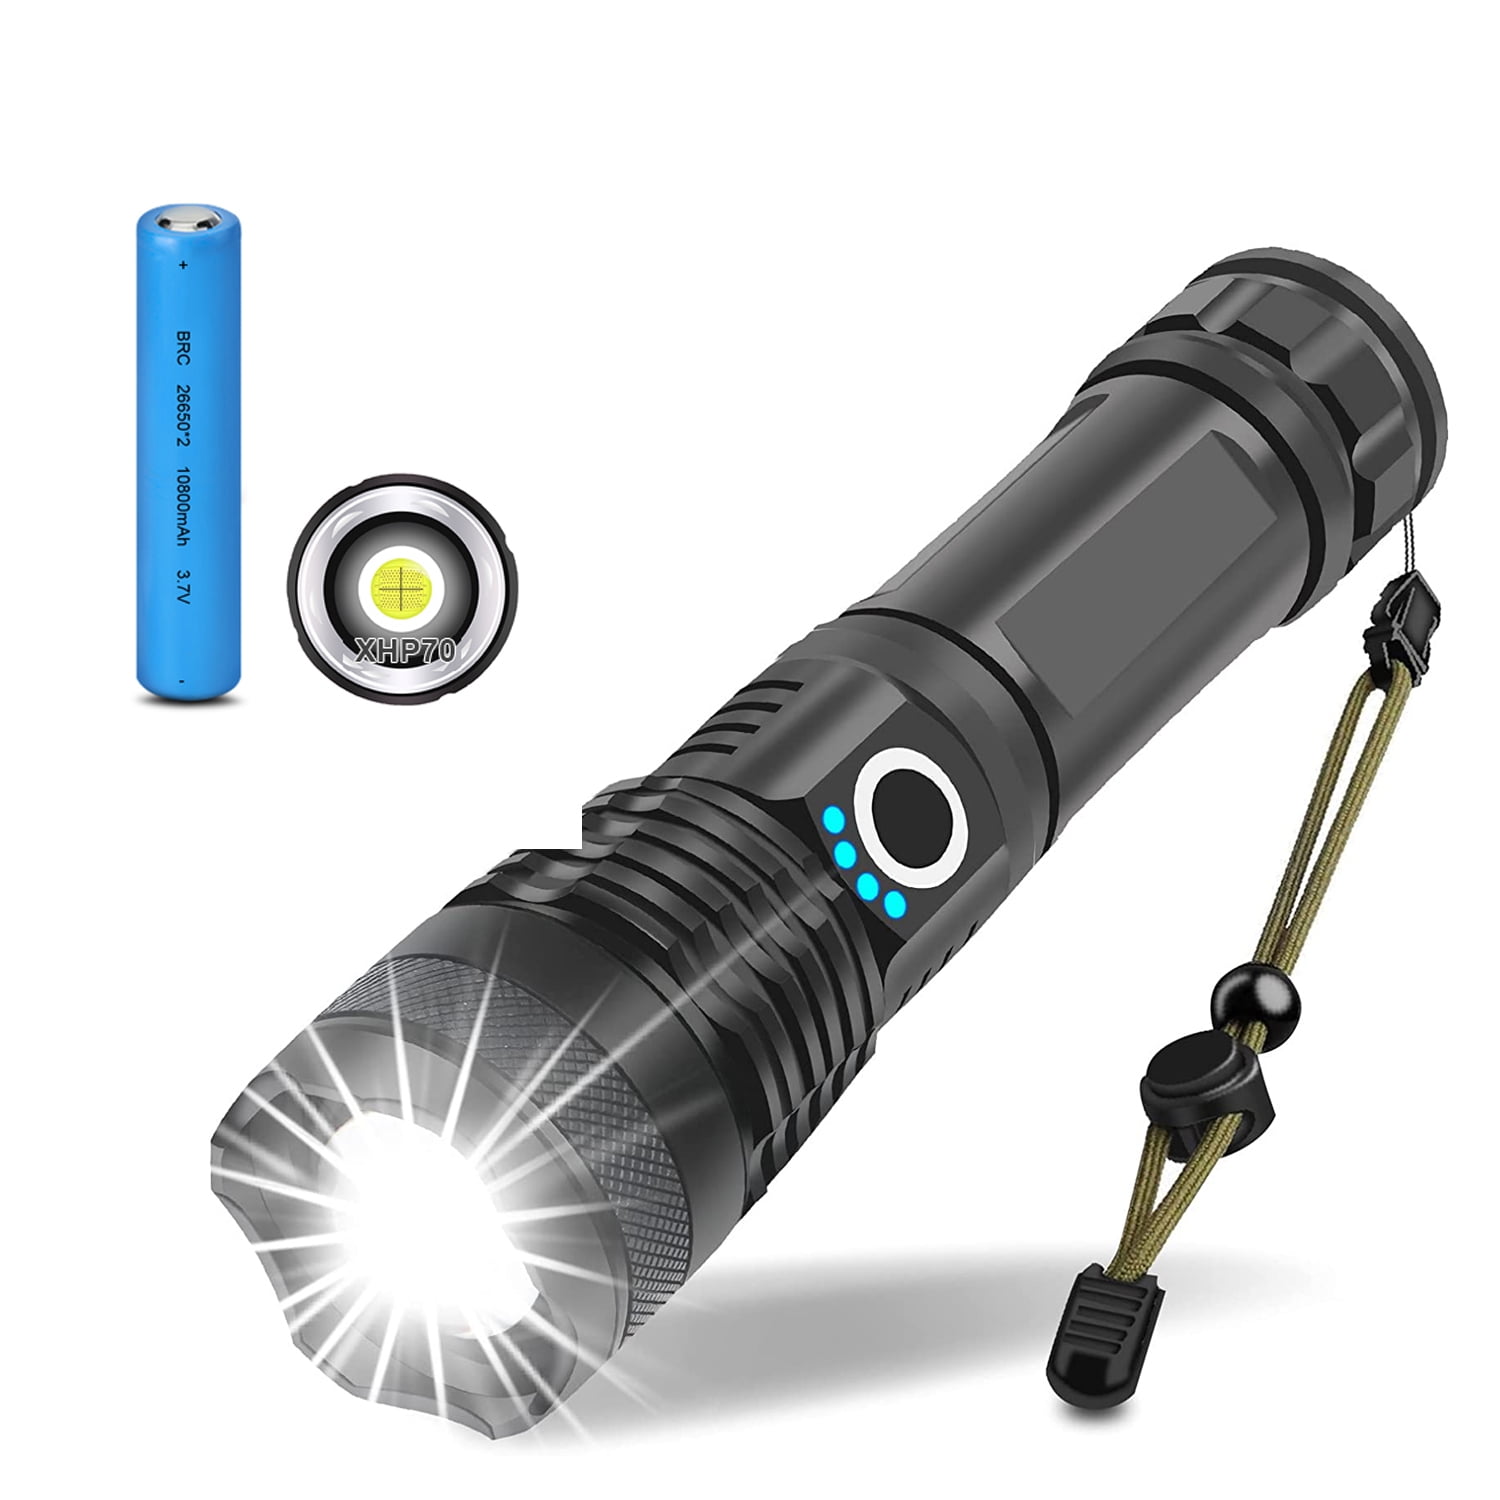 Brightest Led Flashlights Rechargeable 2 Pack Waterproof 1500 High Lumen Tactic 